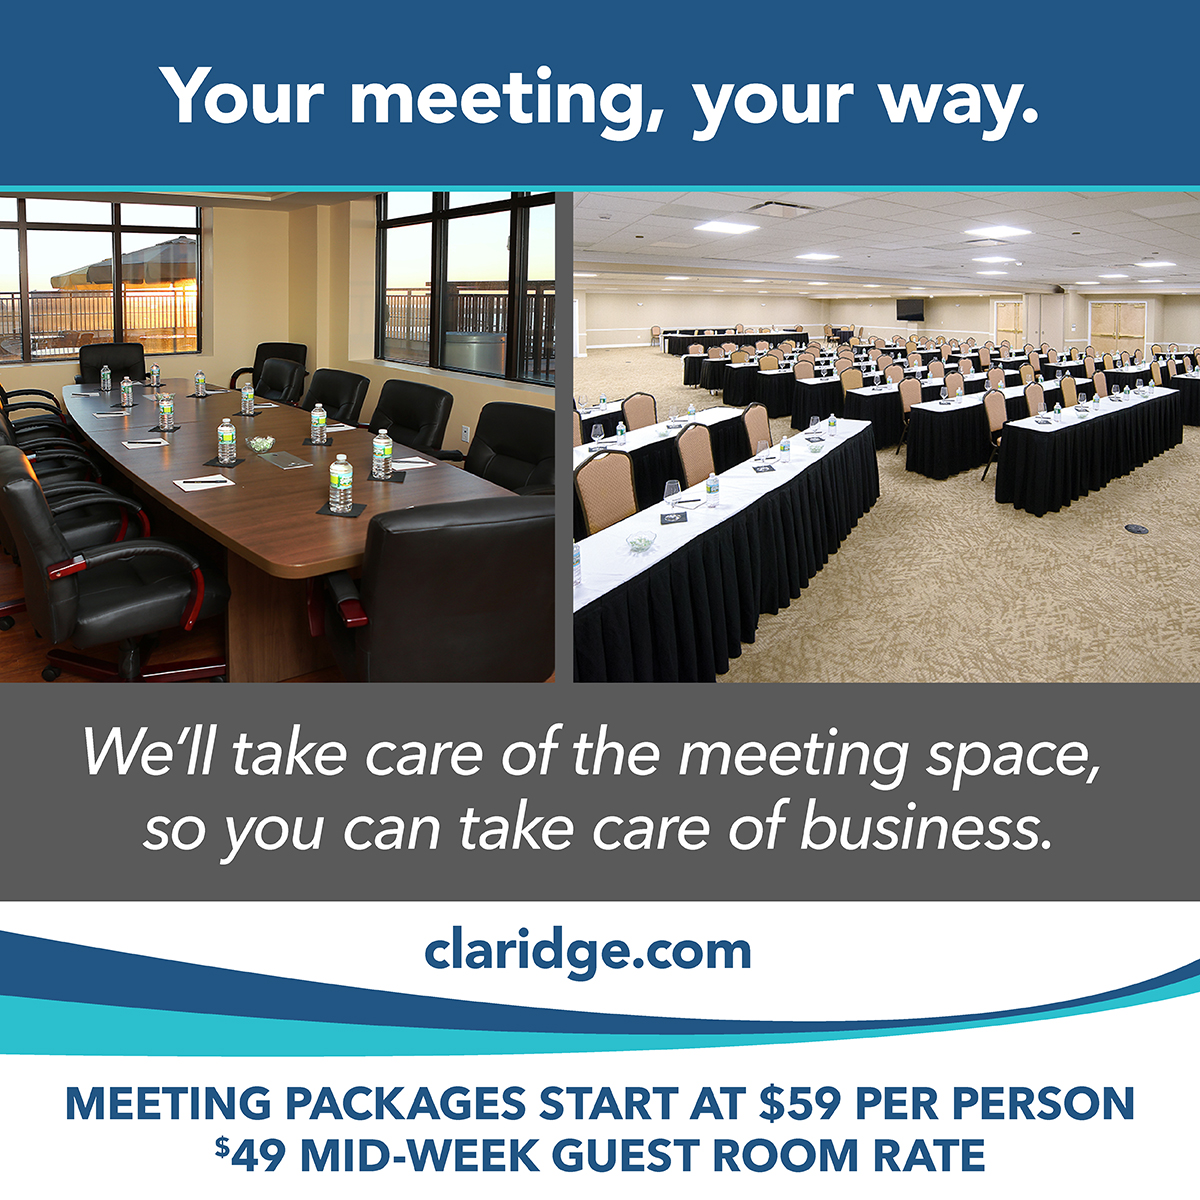 Your meeting, your way. Check out our meeting packages starting at $59 per person, along with a $49 mid-week guest room rate! claridge.com We'll take care of the meeting space so you can take care of business! 💼